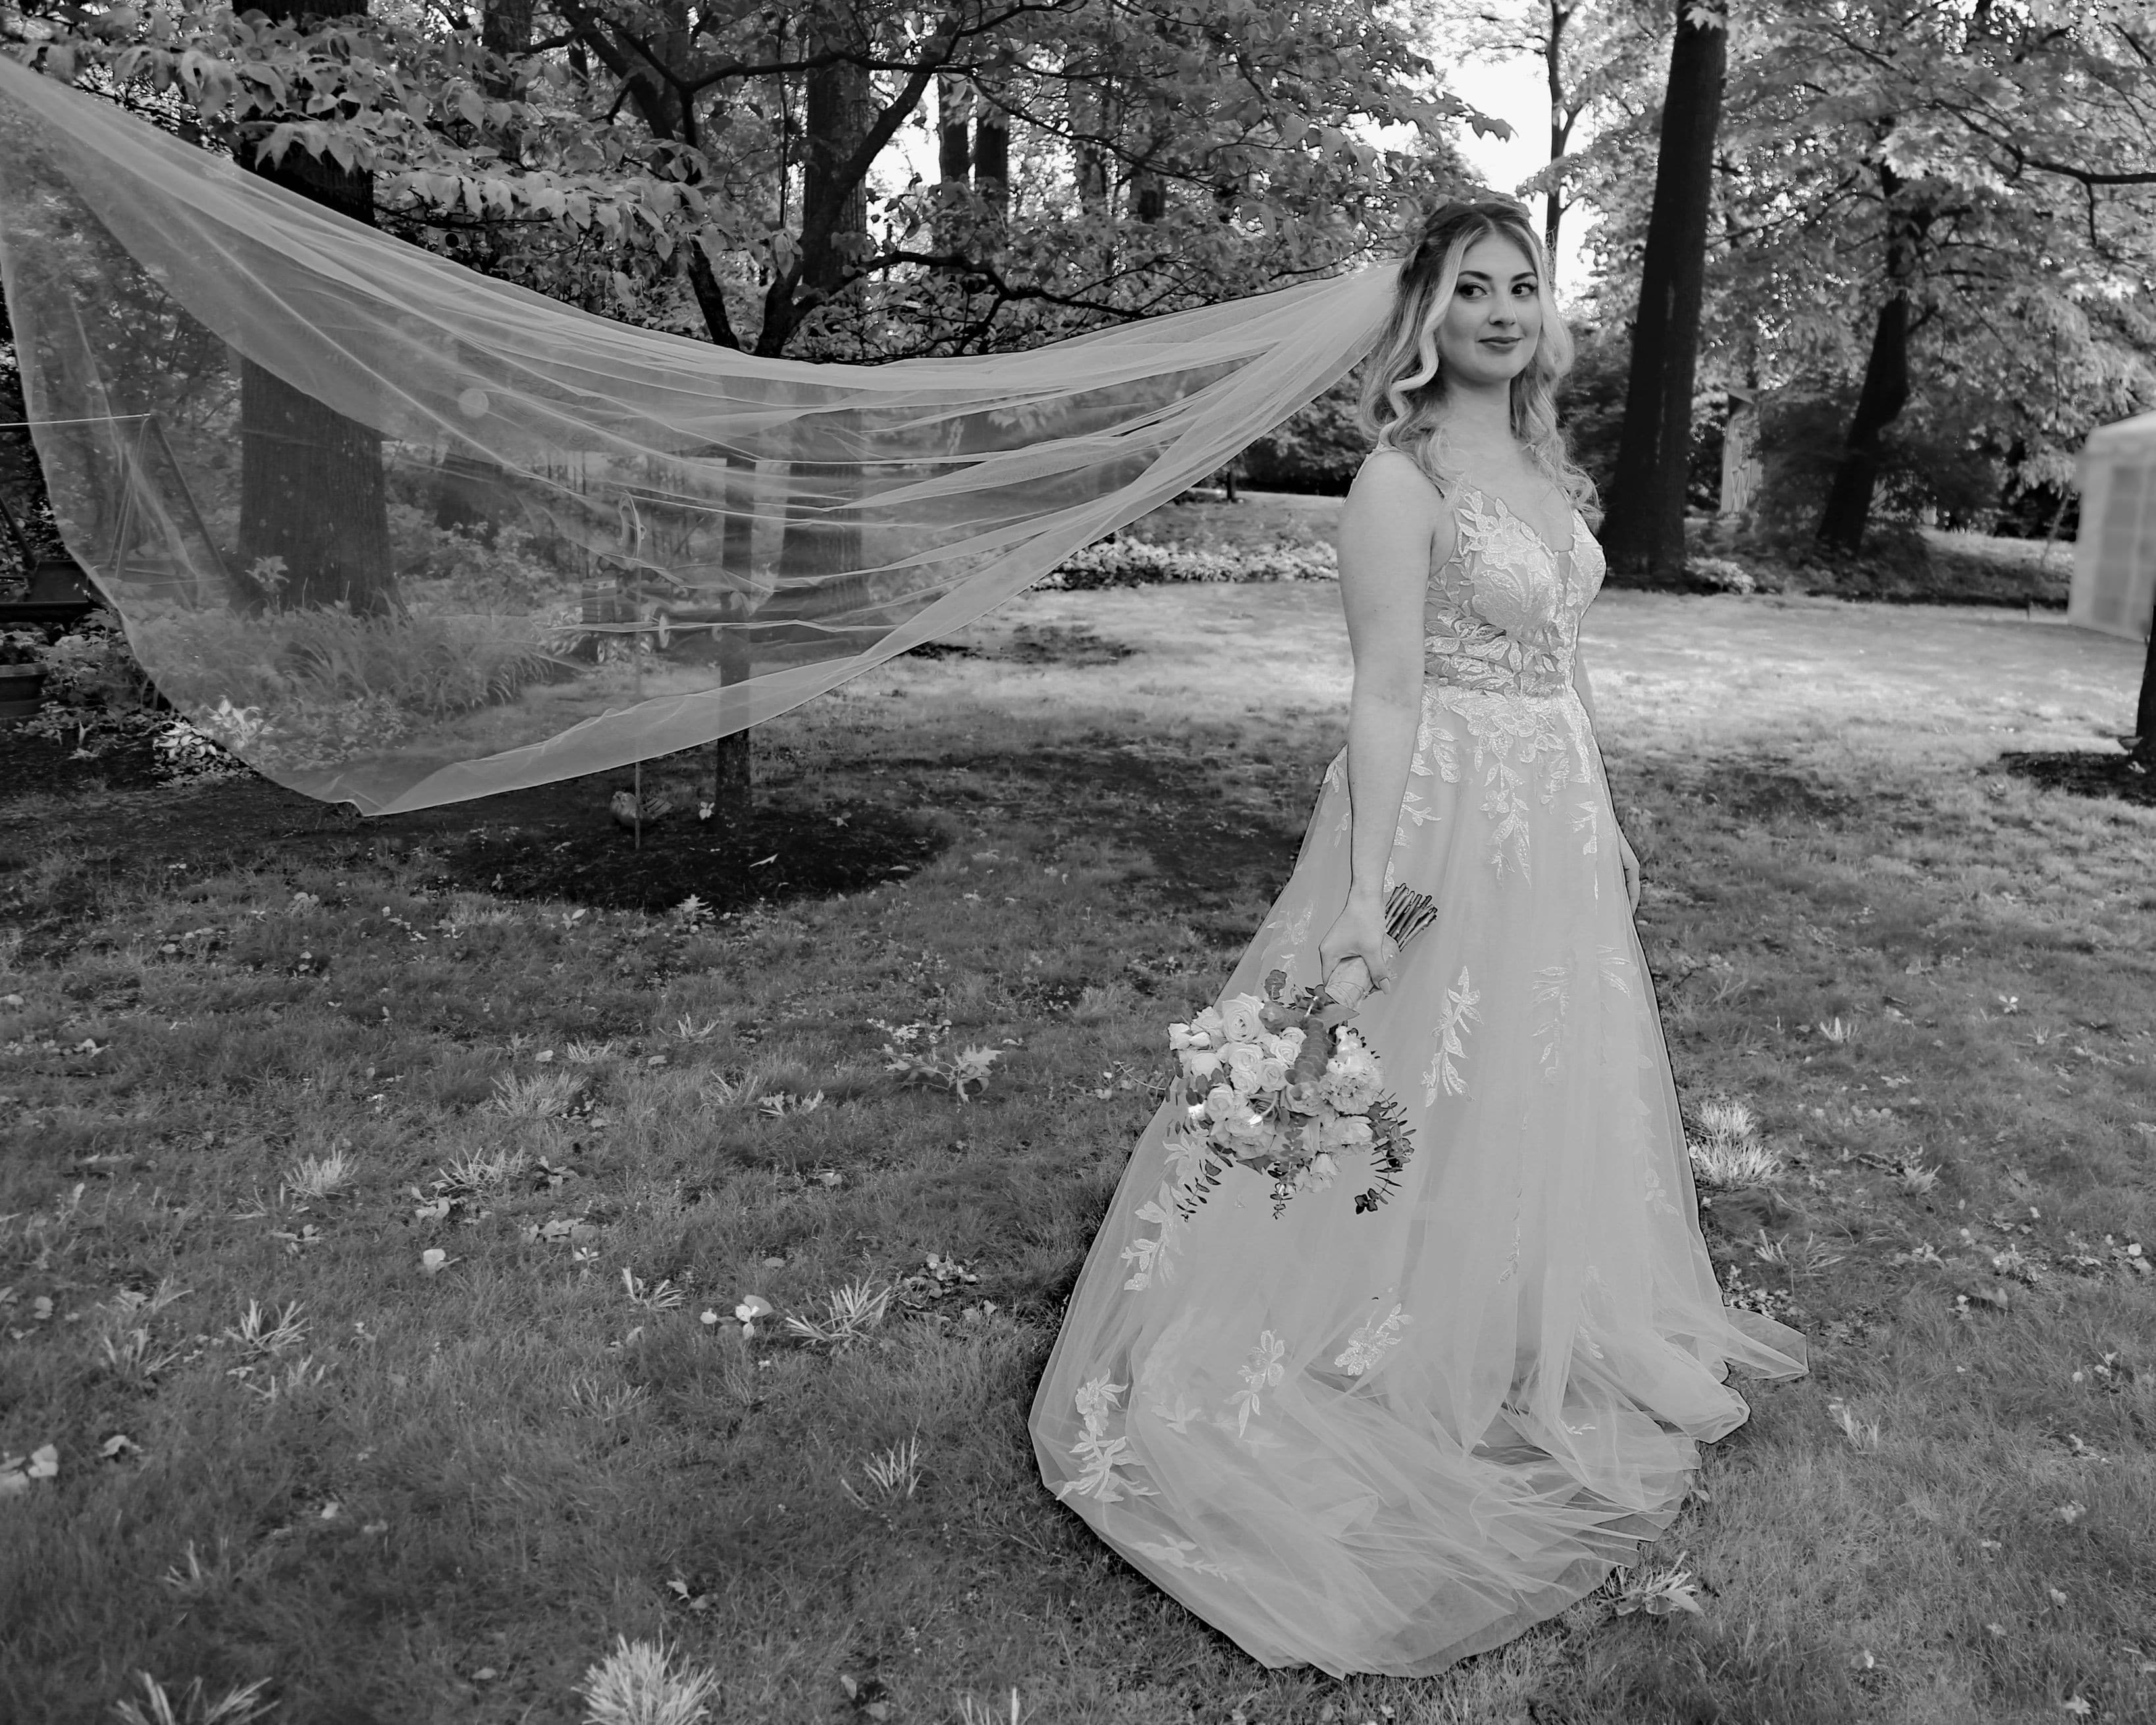 Wedding Photographers in Bucks County. Photography by Angel C at Tylerstar Productions. Black and White photo of a Bride with her Veil Flying